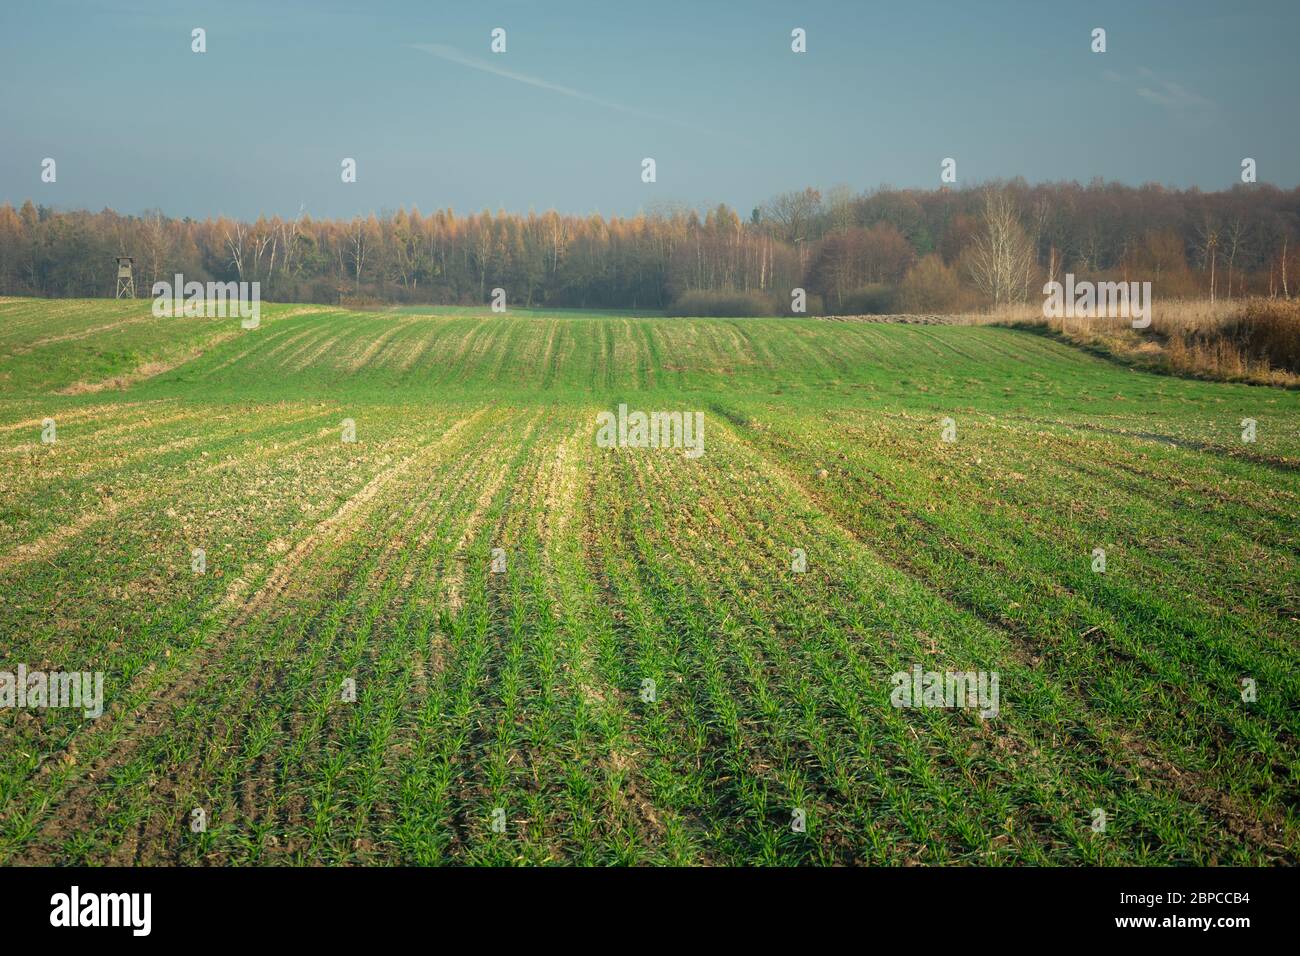 Young seedlings on a hilly field, forest on the horizon, view on a sunny day Stock Photo